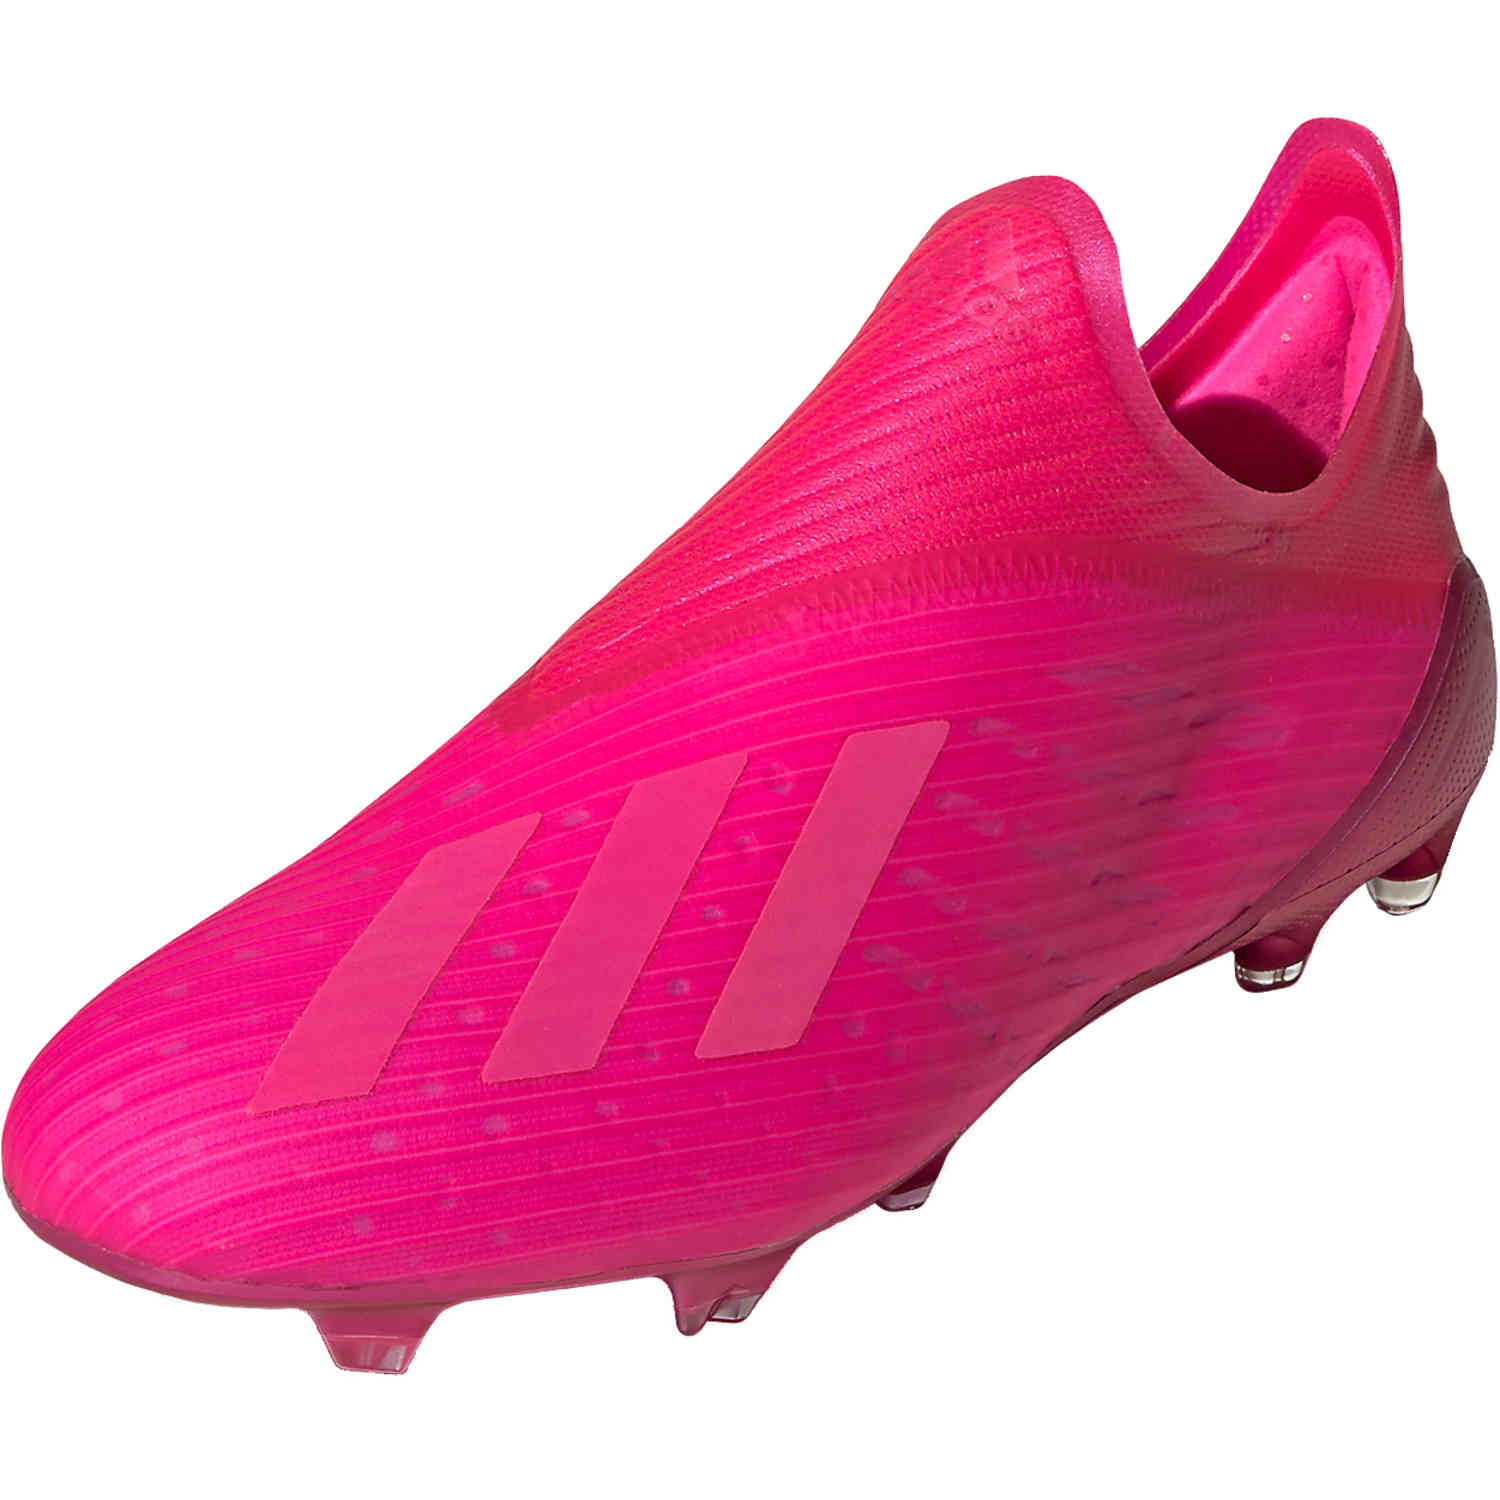 adidas X 19 + FG - Locality Pack - Soccer Master